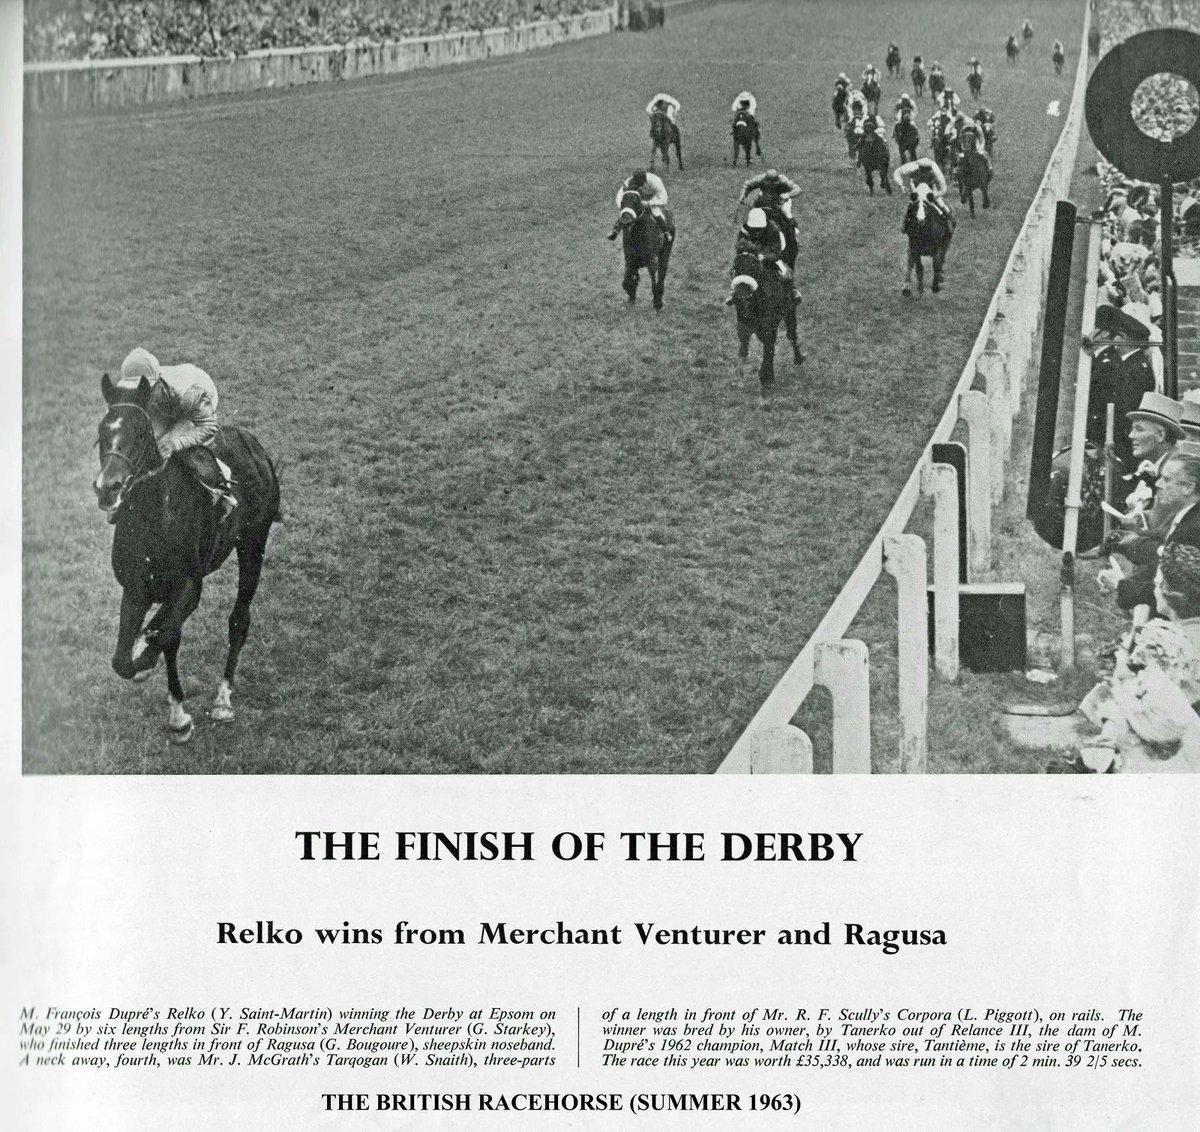 OTD 1955 Francois Mathet-trained Phil Drake (100-8) 🇫🇷 ridden by Freddie Palmer won the Derby for Owner Suzy Volterra; 100-1 shot Panaslipper (Jimmy Eddery) was 2nd with 11-4 fav Acropolis (Doug Smith) in 3rd. Francois won the Derby again in 1963 with Relko. 🏇👏#RacingMemories